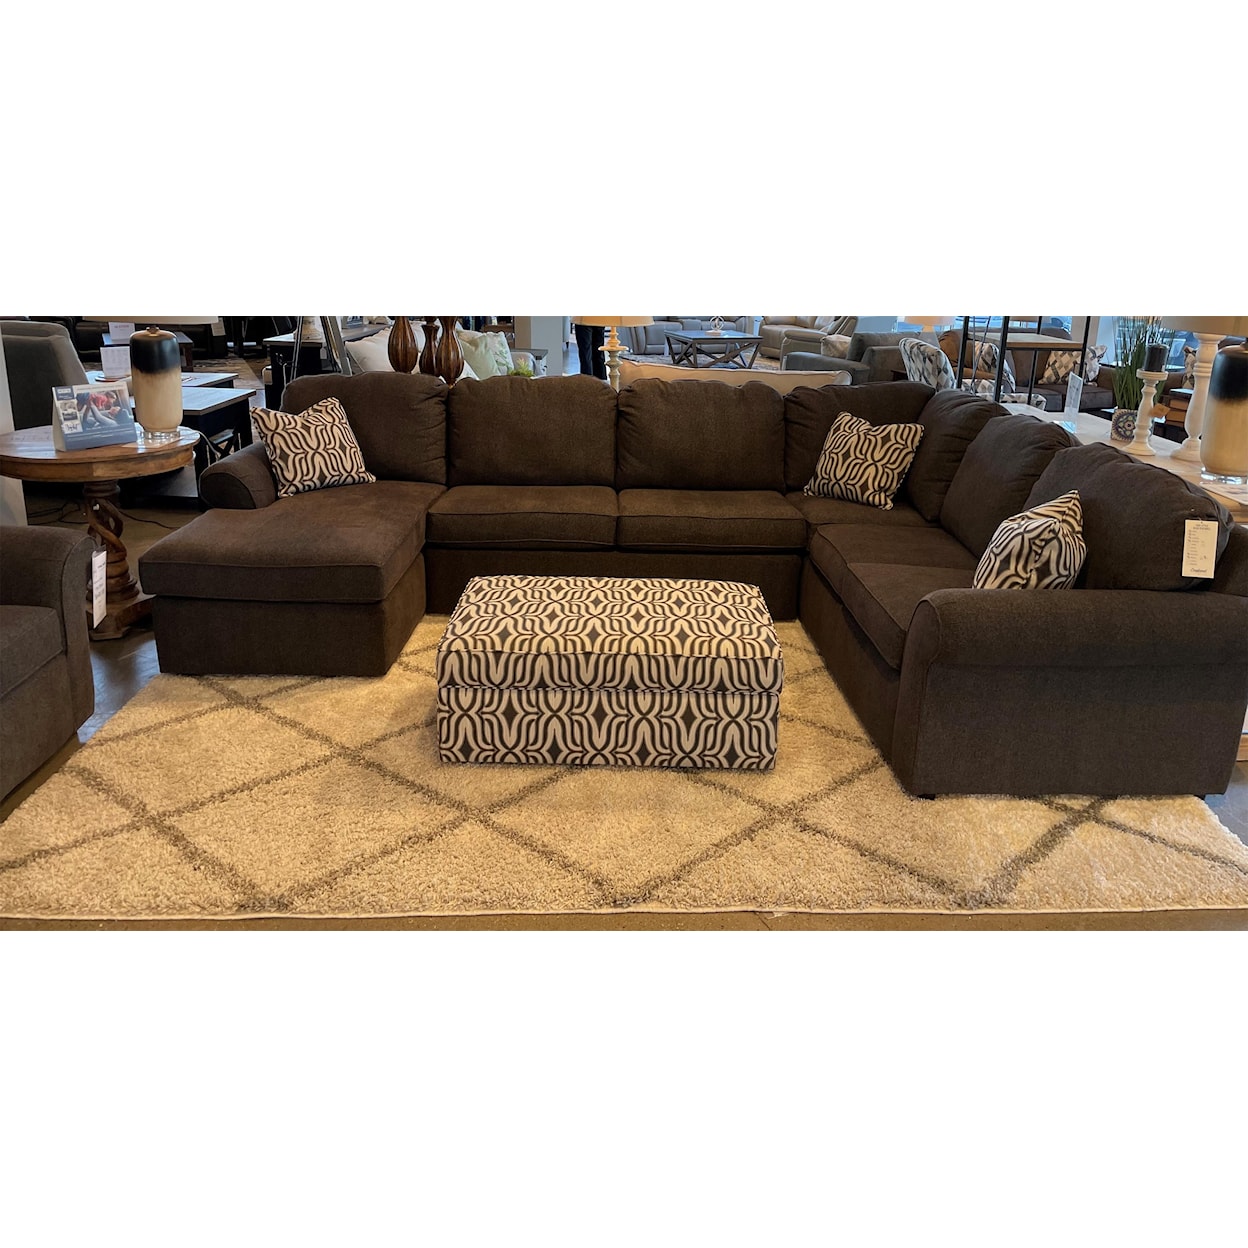 England 2400/X Series - Malibu 5-6 Seat (left side) Chaise Sectional